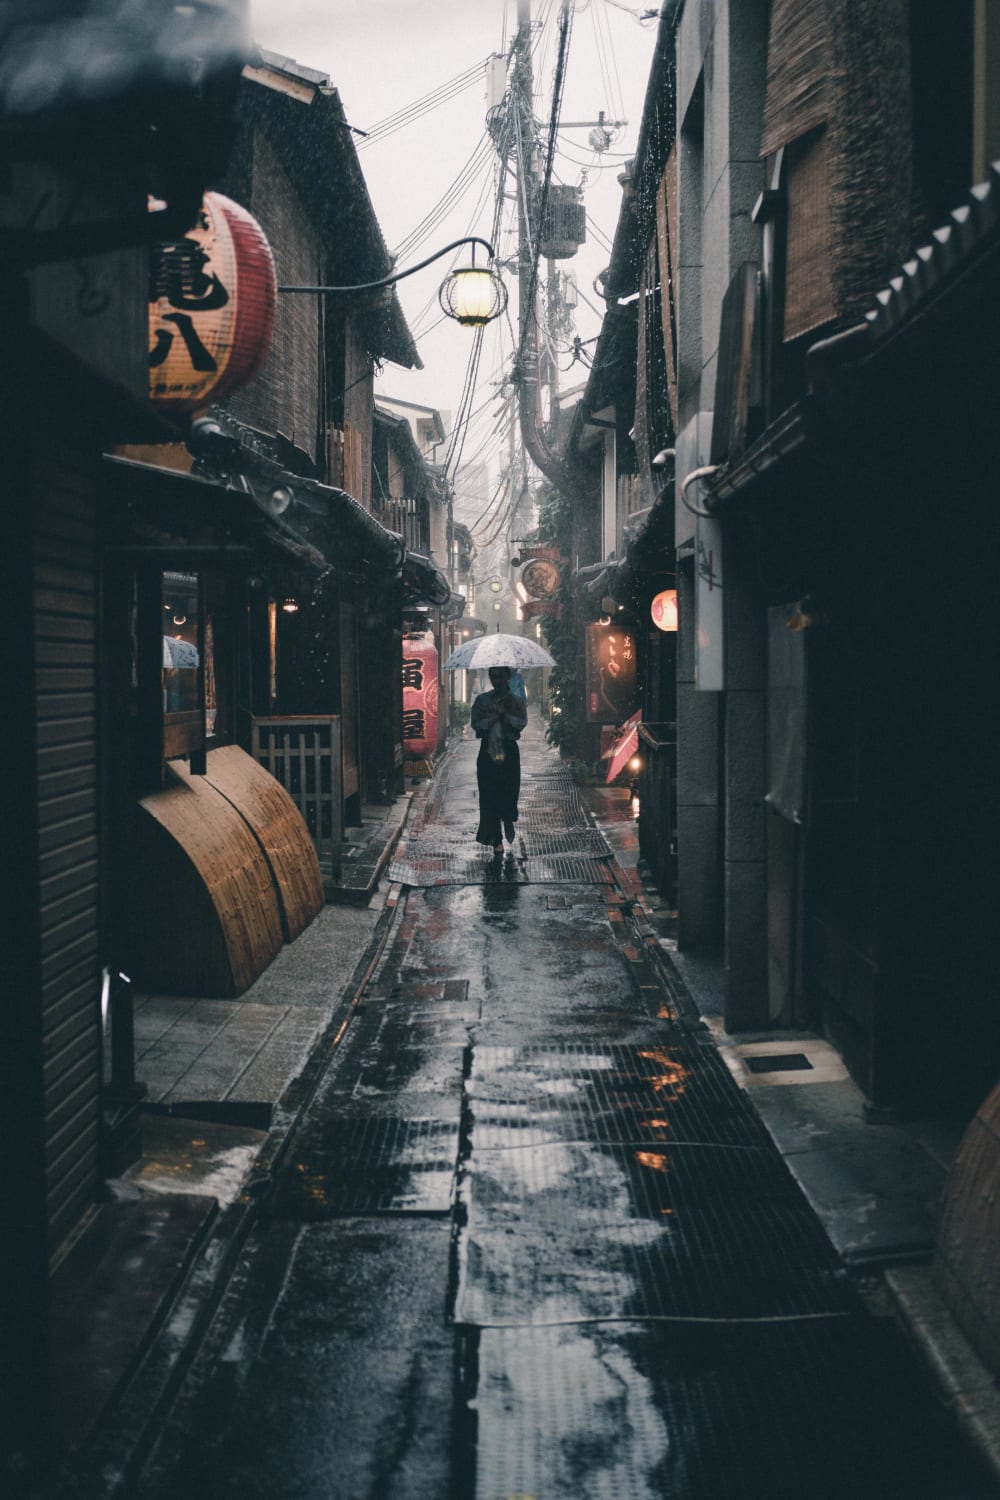 A rainy day in Kyoto, Japan